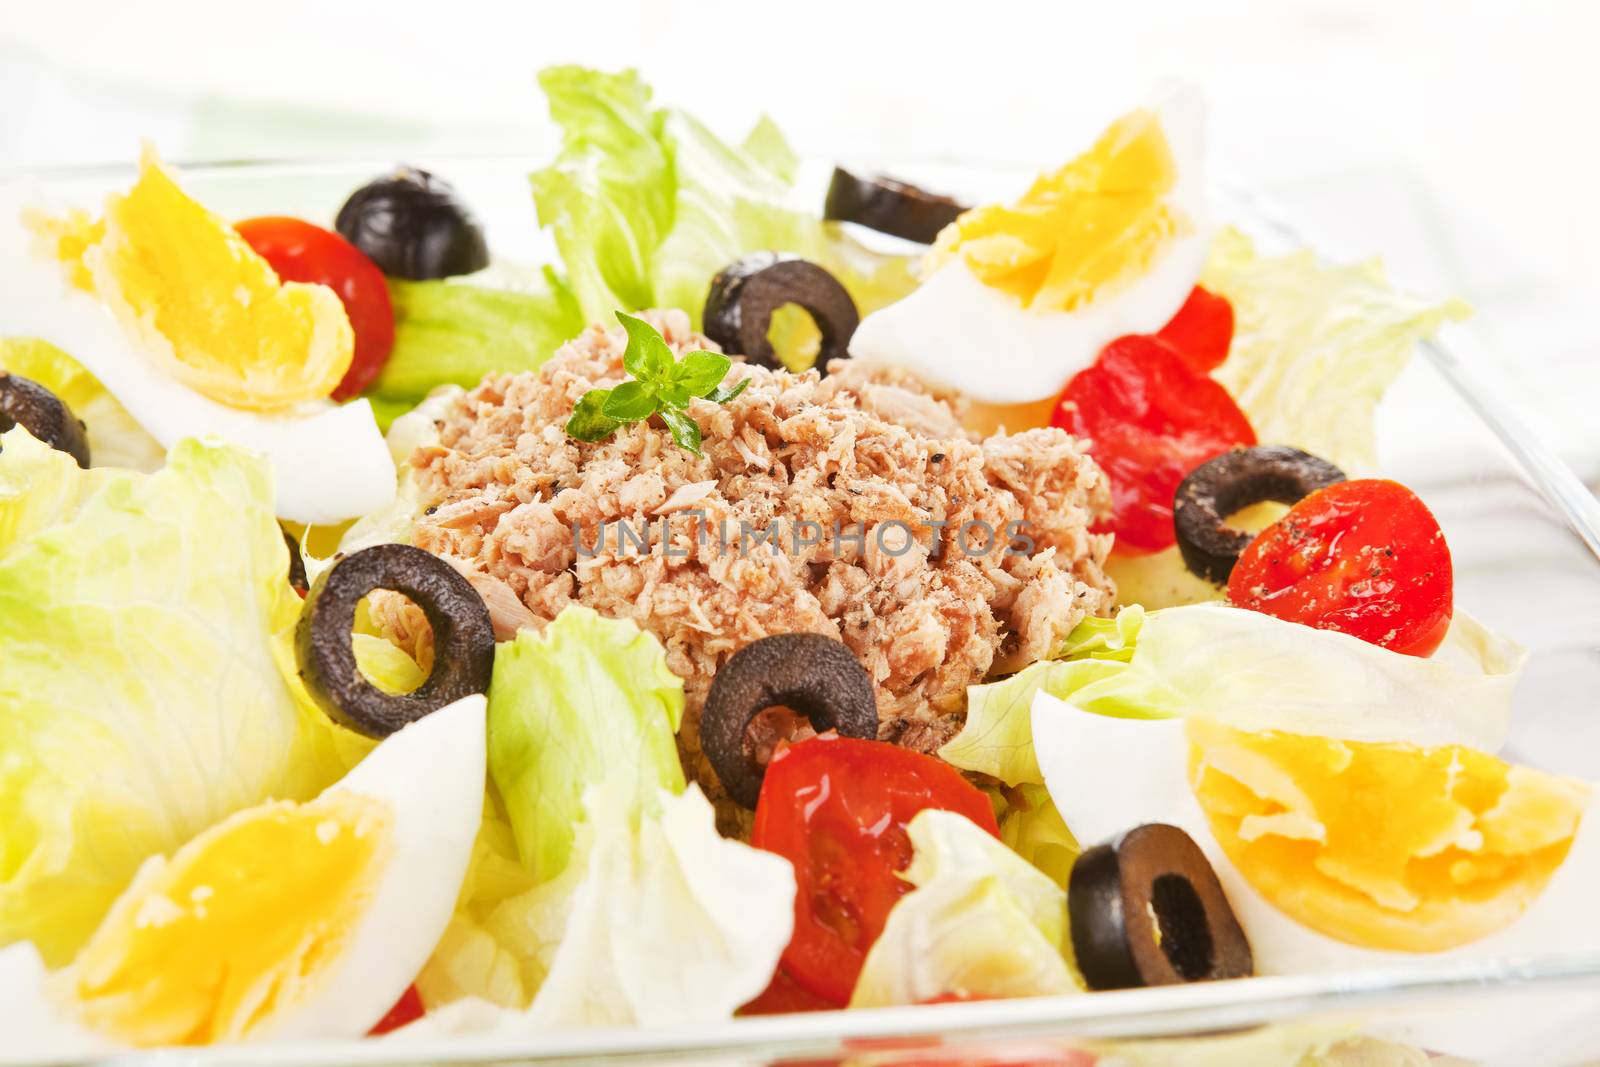 Tuna salad with olives, eggs and tomatoes close up. Summer food.